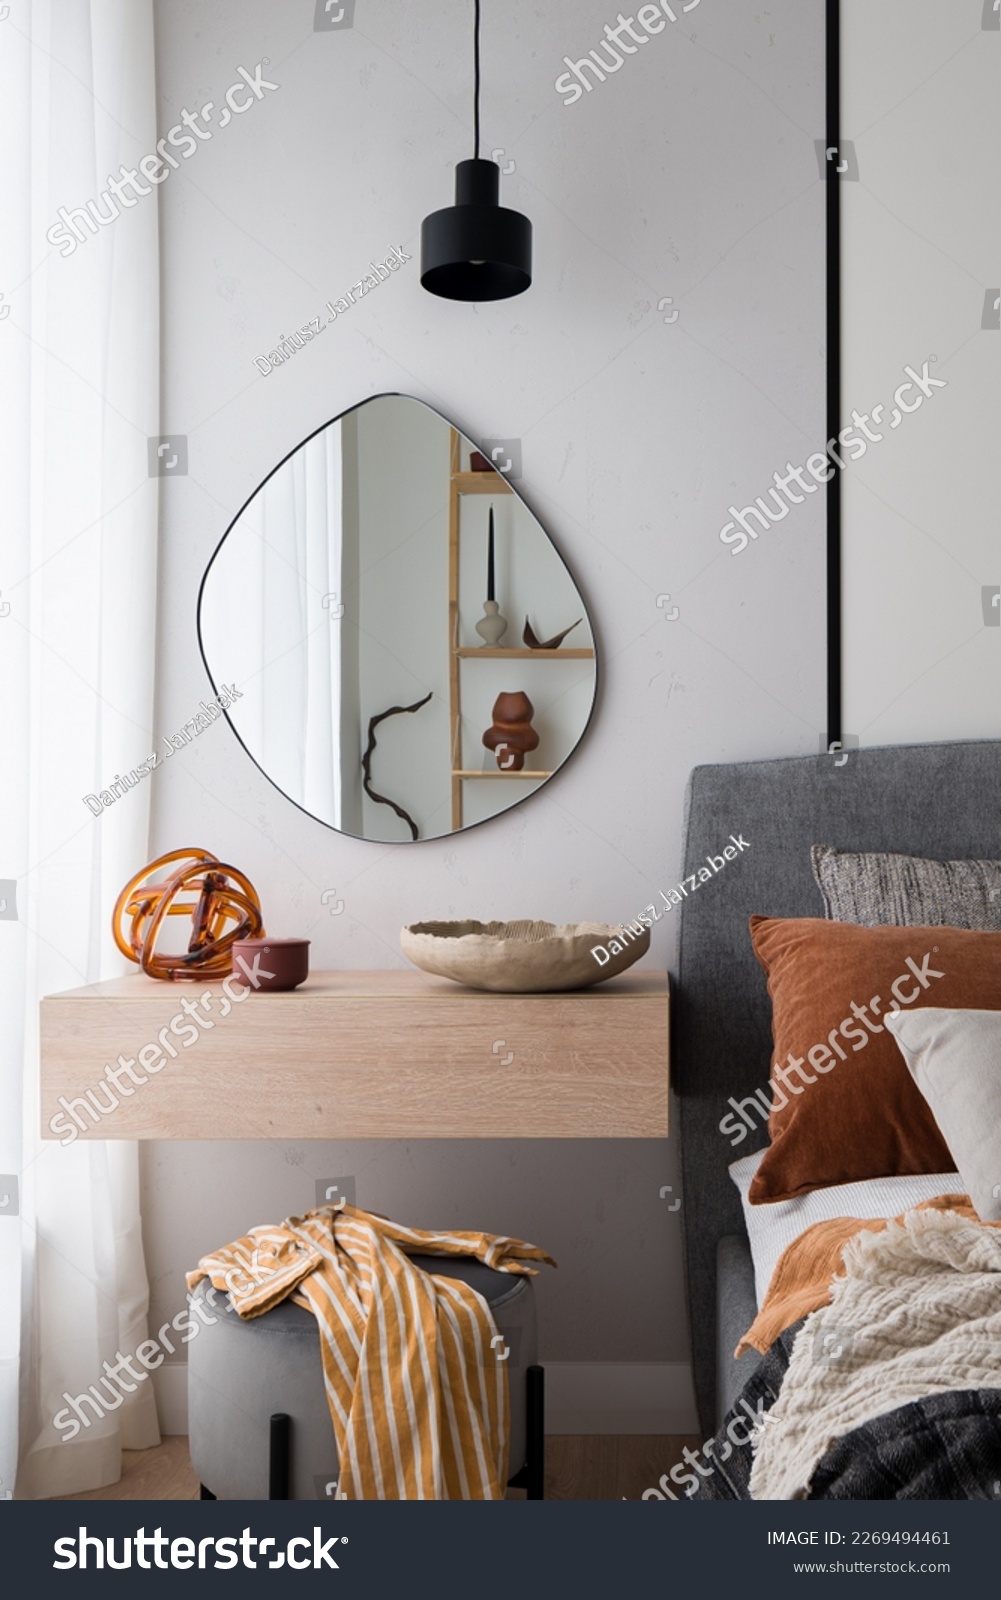 Modern, irregular shaped mirror above simple, wooden dressing table next to cozy bed in bedroom #2269494461